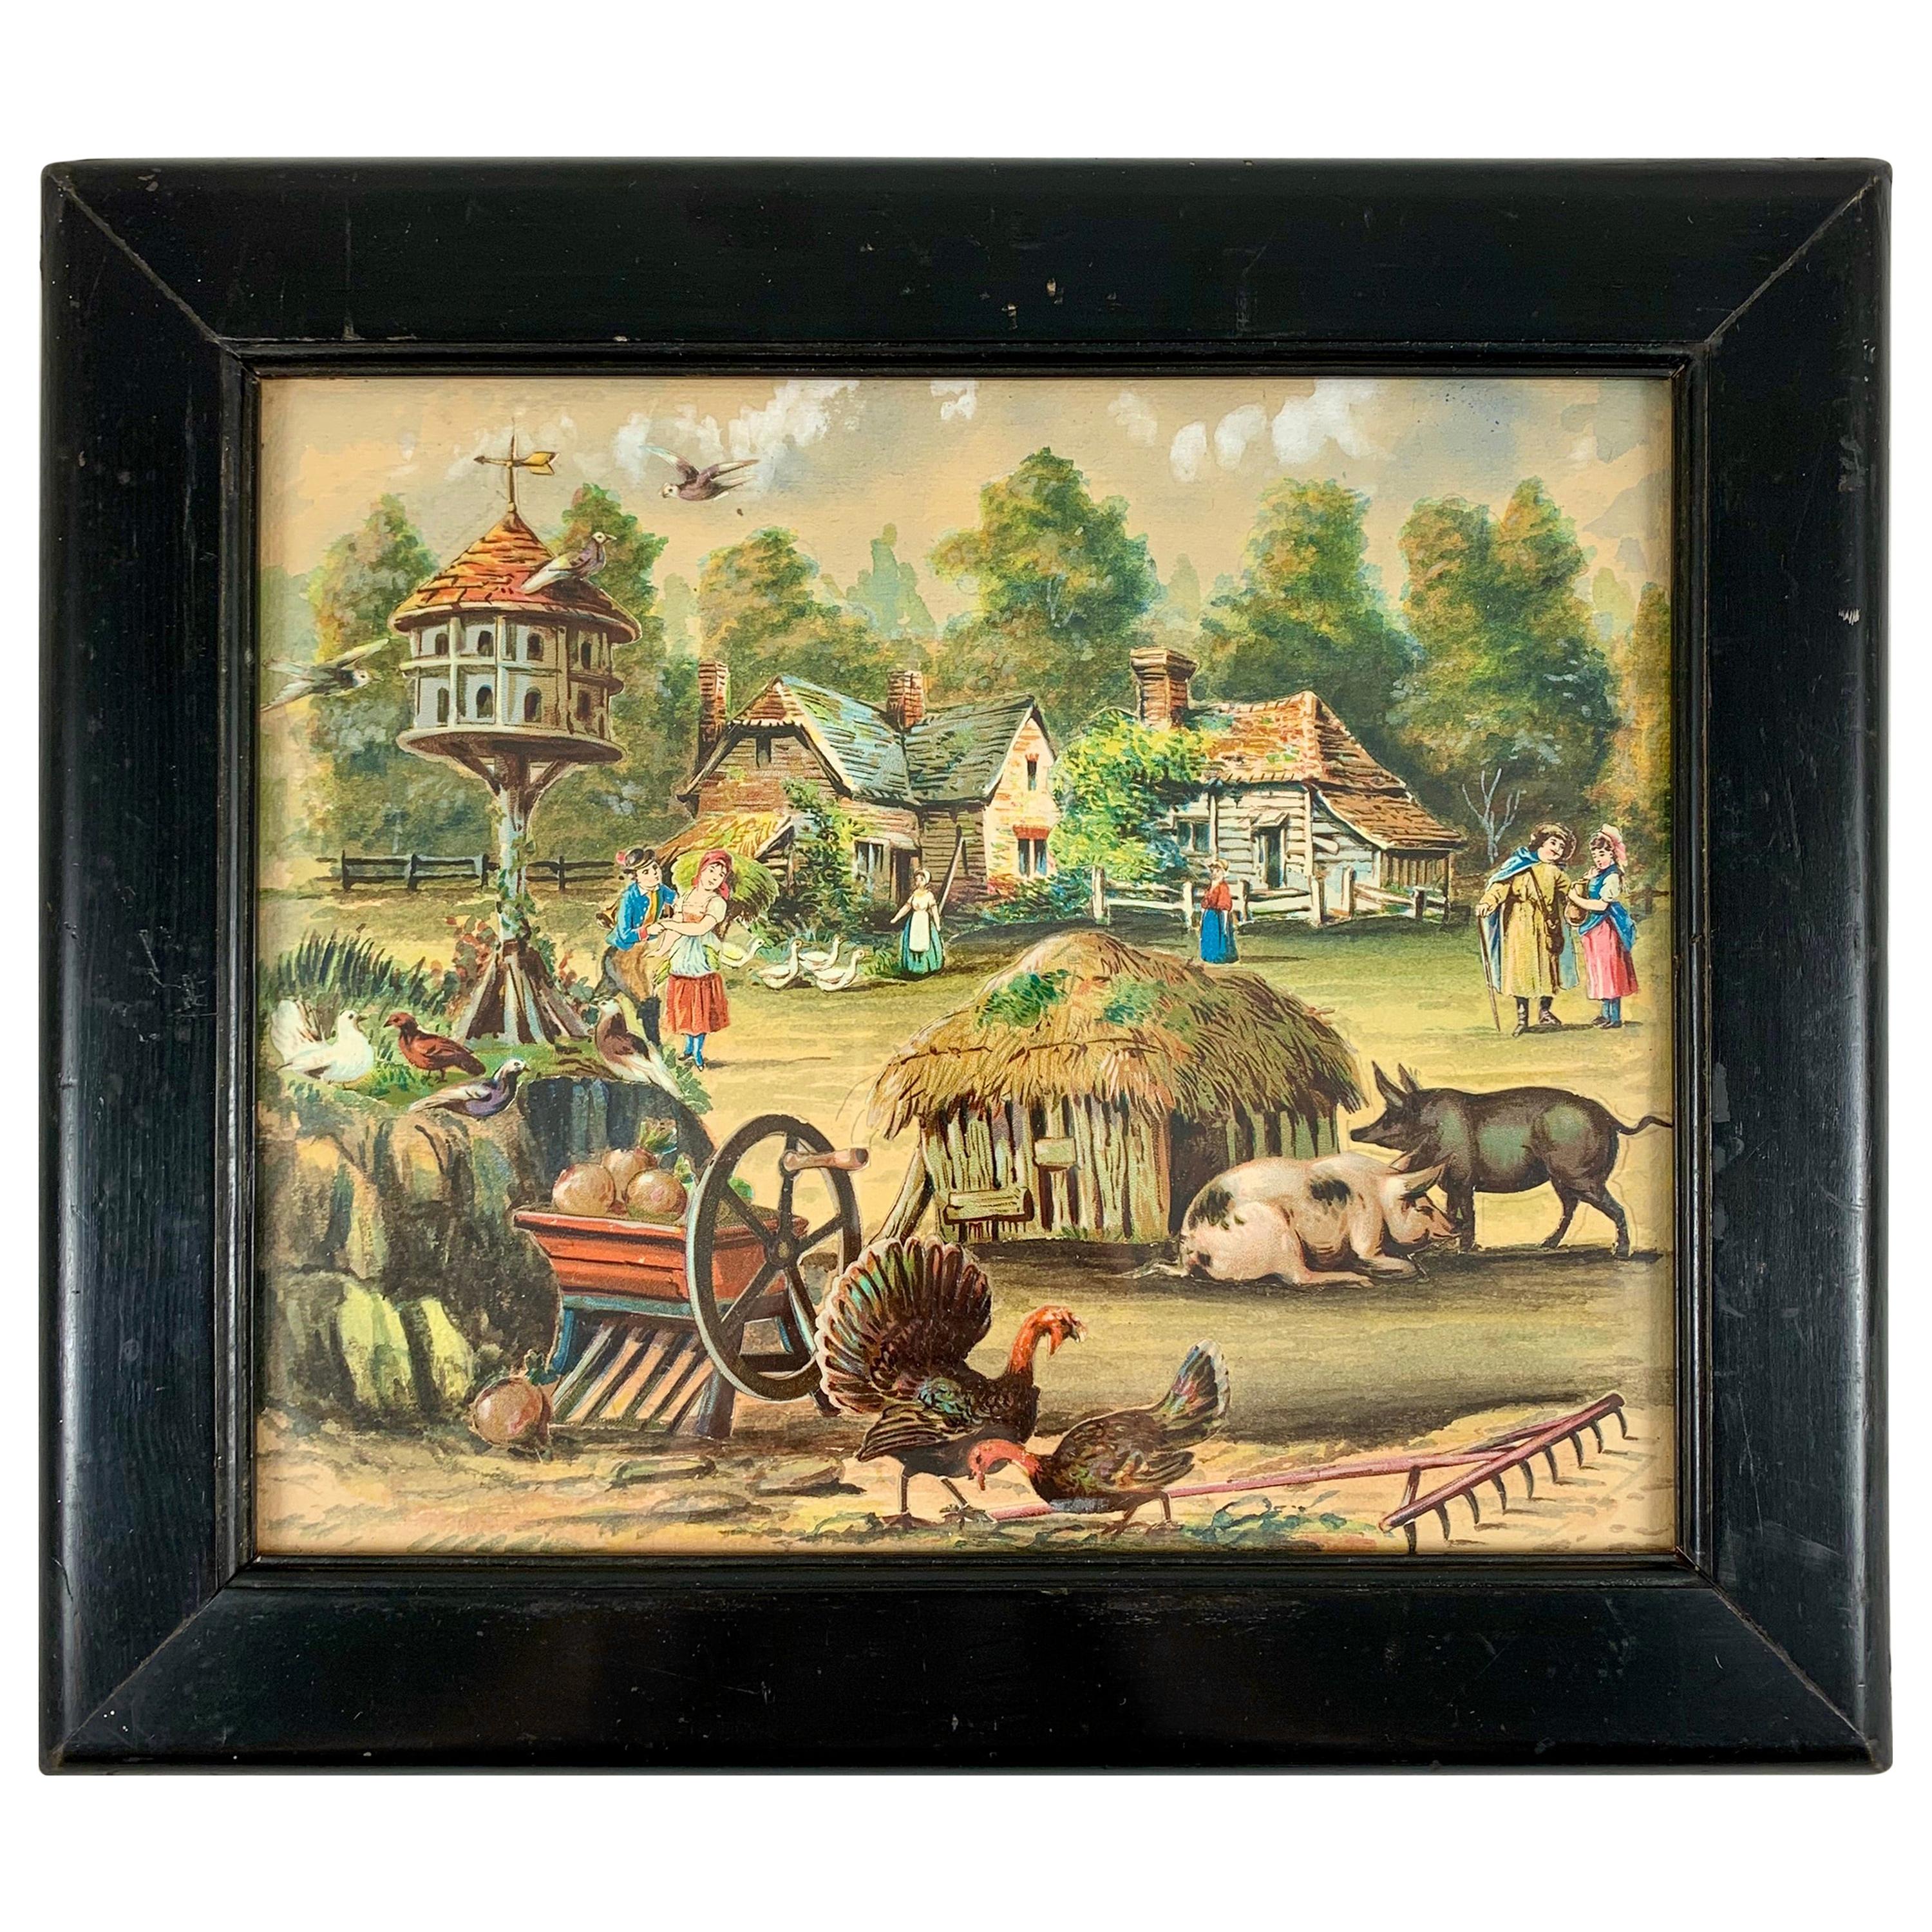 19th Century English Framed Decalomania Découpage & Watercolor Farm Art Picture